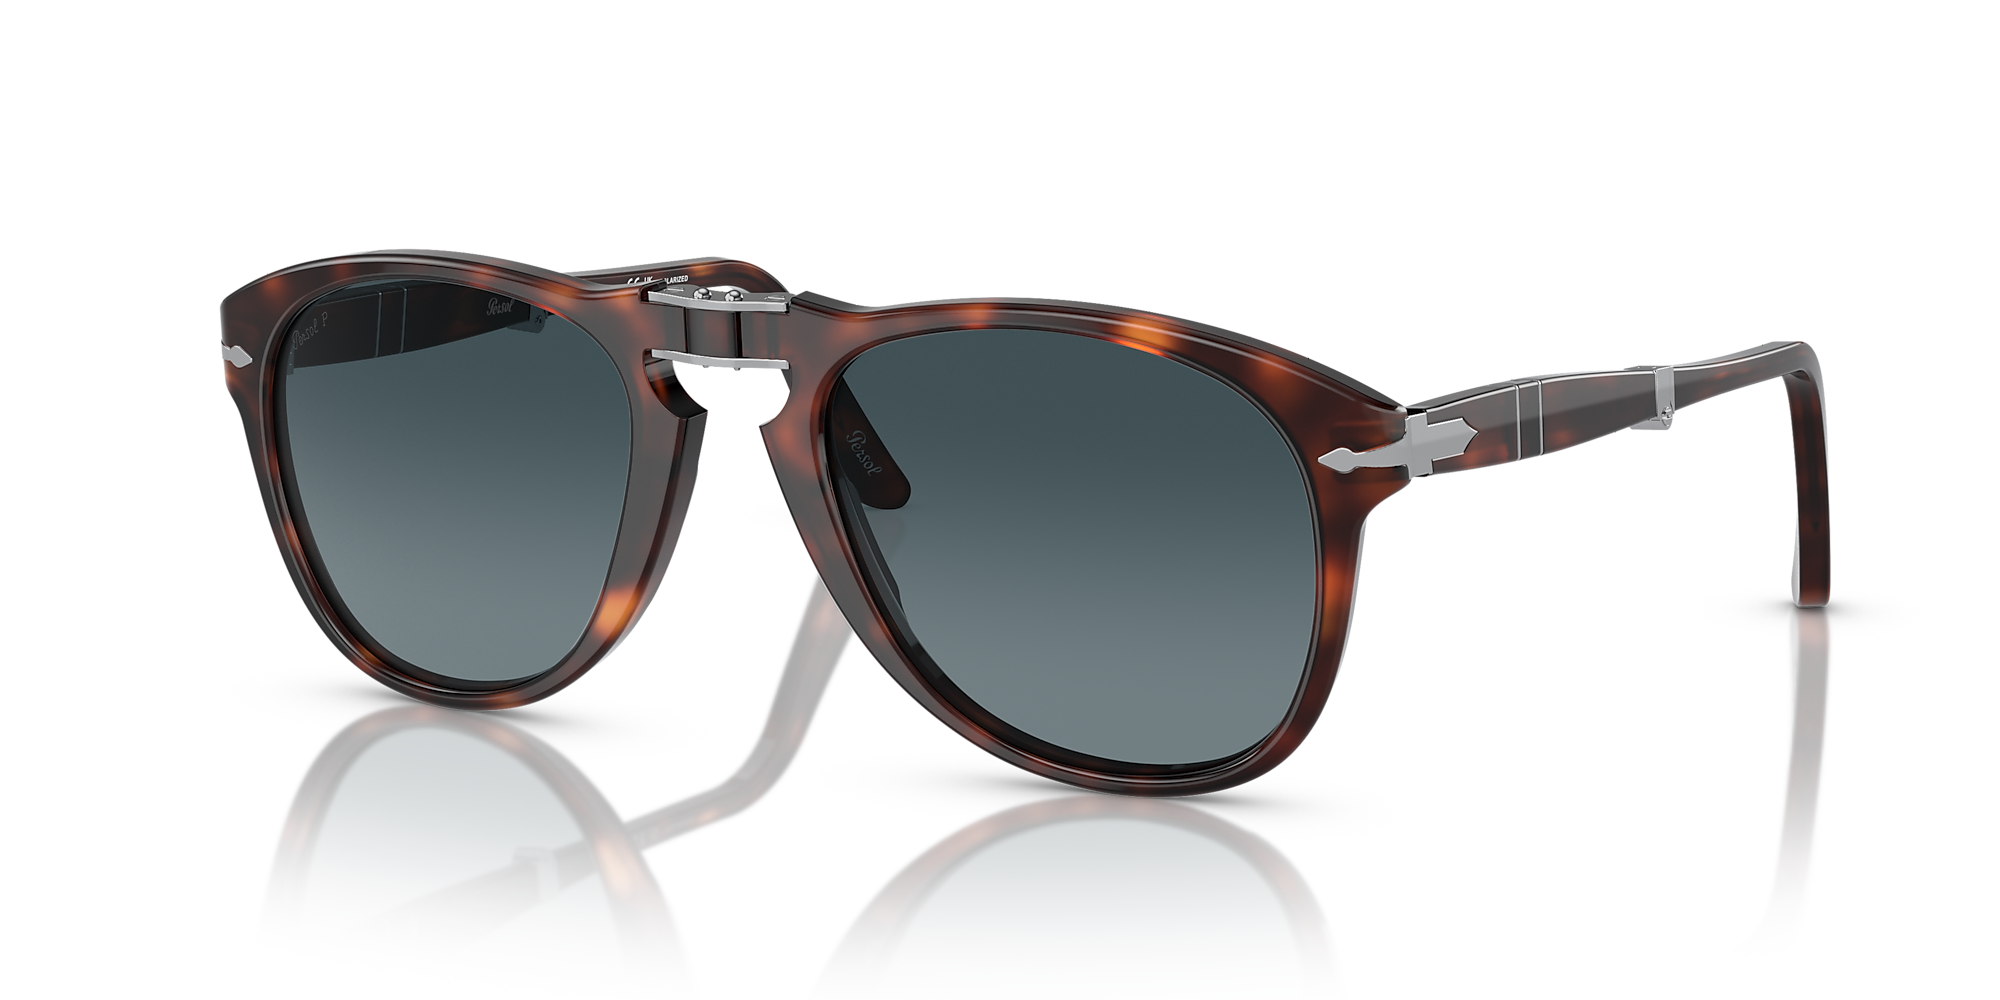 The 15 Best Sunglasses Brands for Men in 2023: Buying Guide – Robb Report